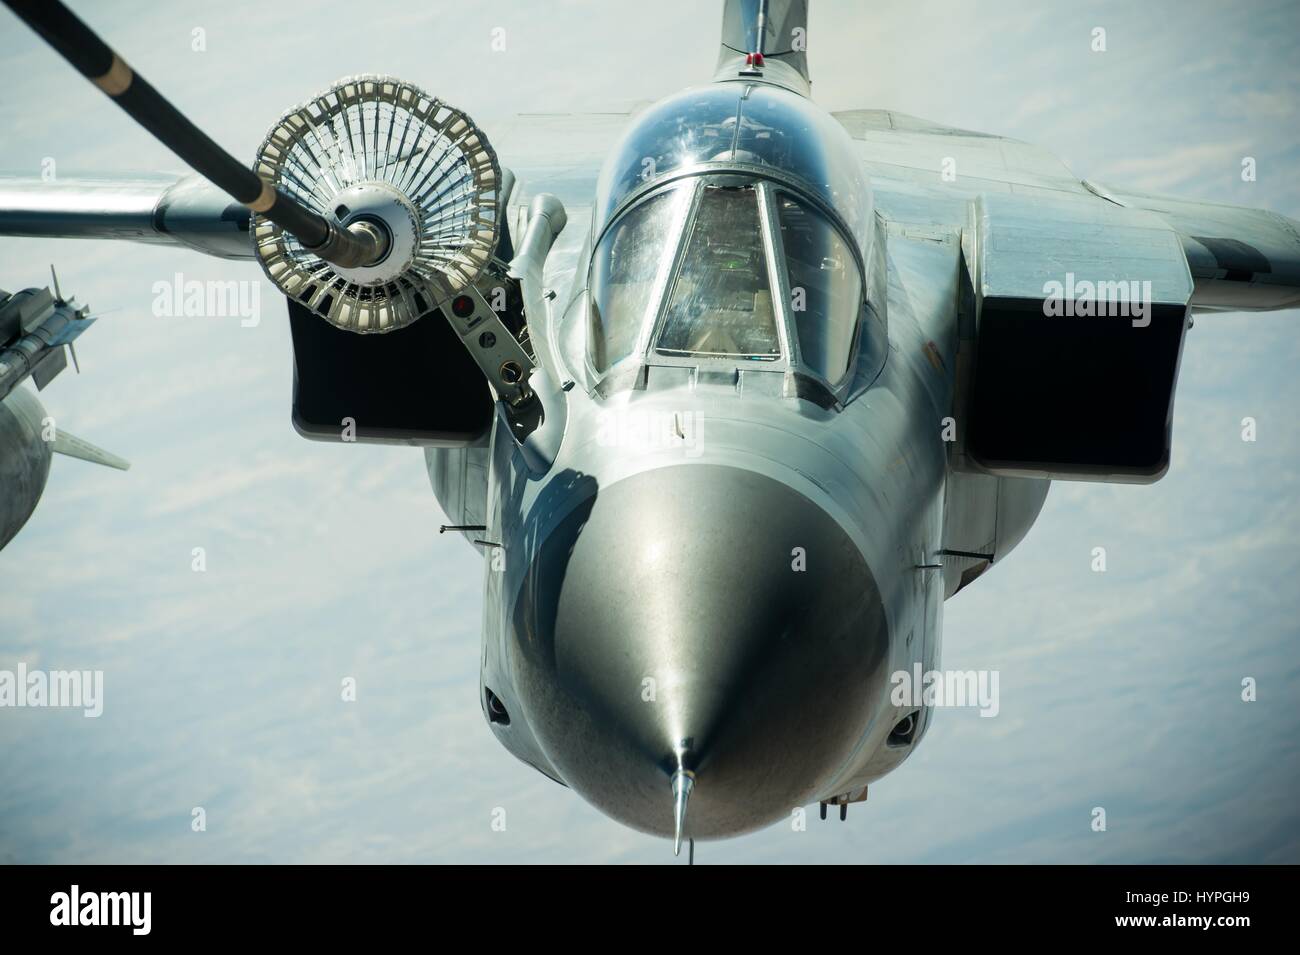 A German Air Force Tornado GR 4 attack aircraft refuels in flight during Operation Inherent Resolve fighting the Islamic State February 22, 2017 over Iraq. Stock Photo